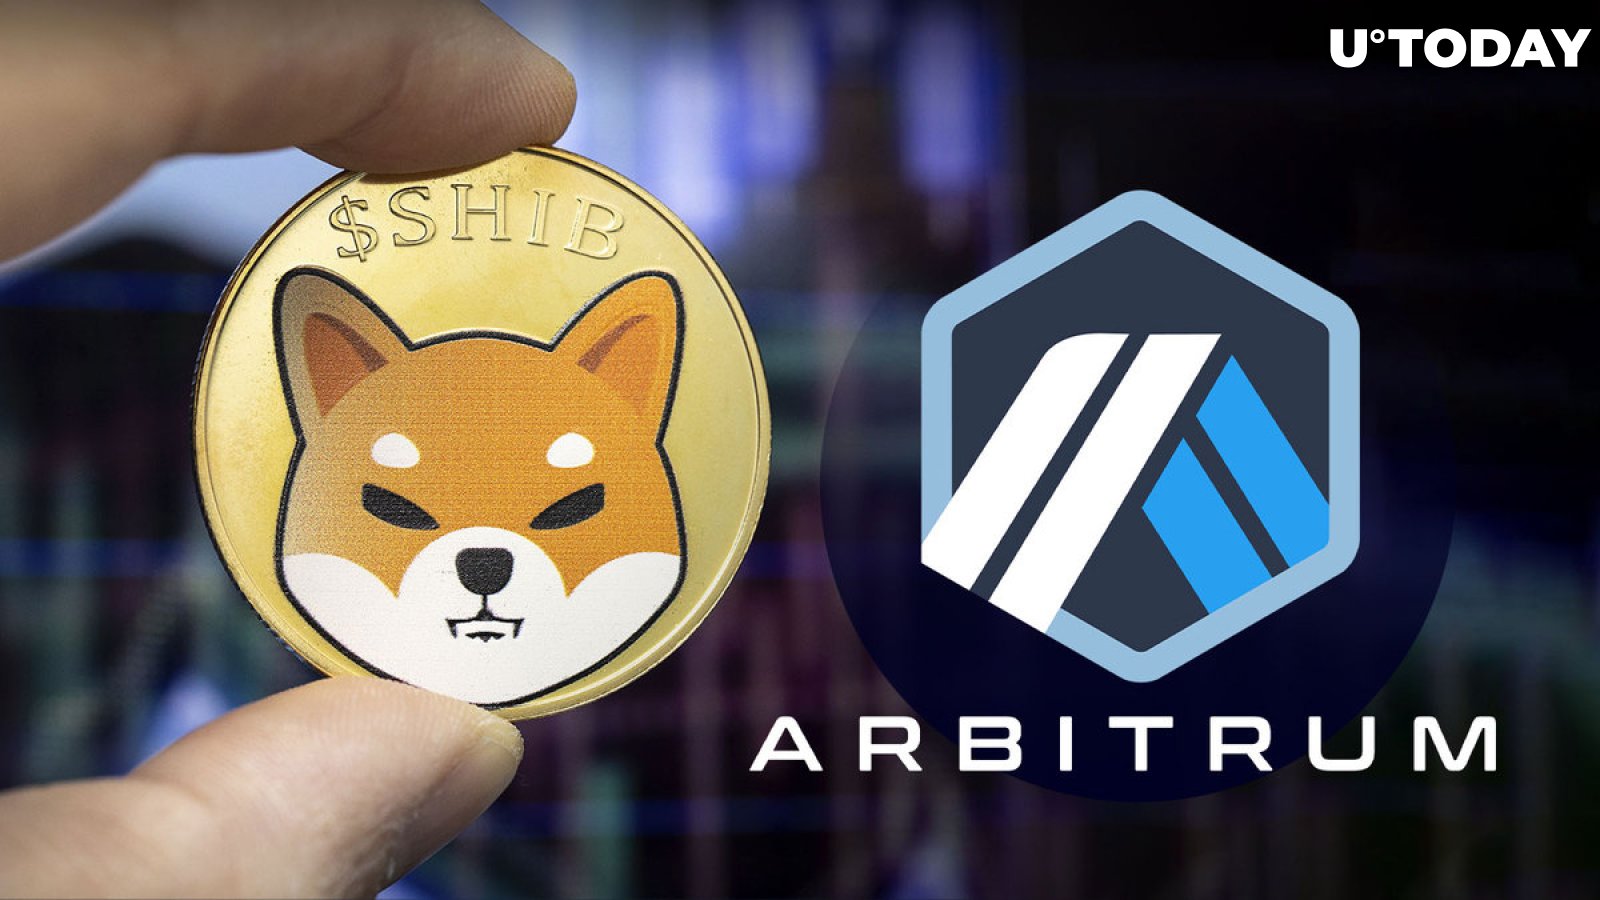 Shiba Inu (SHIB) Offshoot on Arbitrum (ARB) up 216%, Here Are Two Key Reasons Why